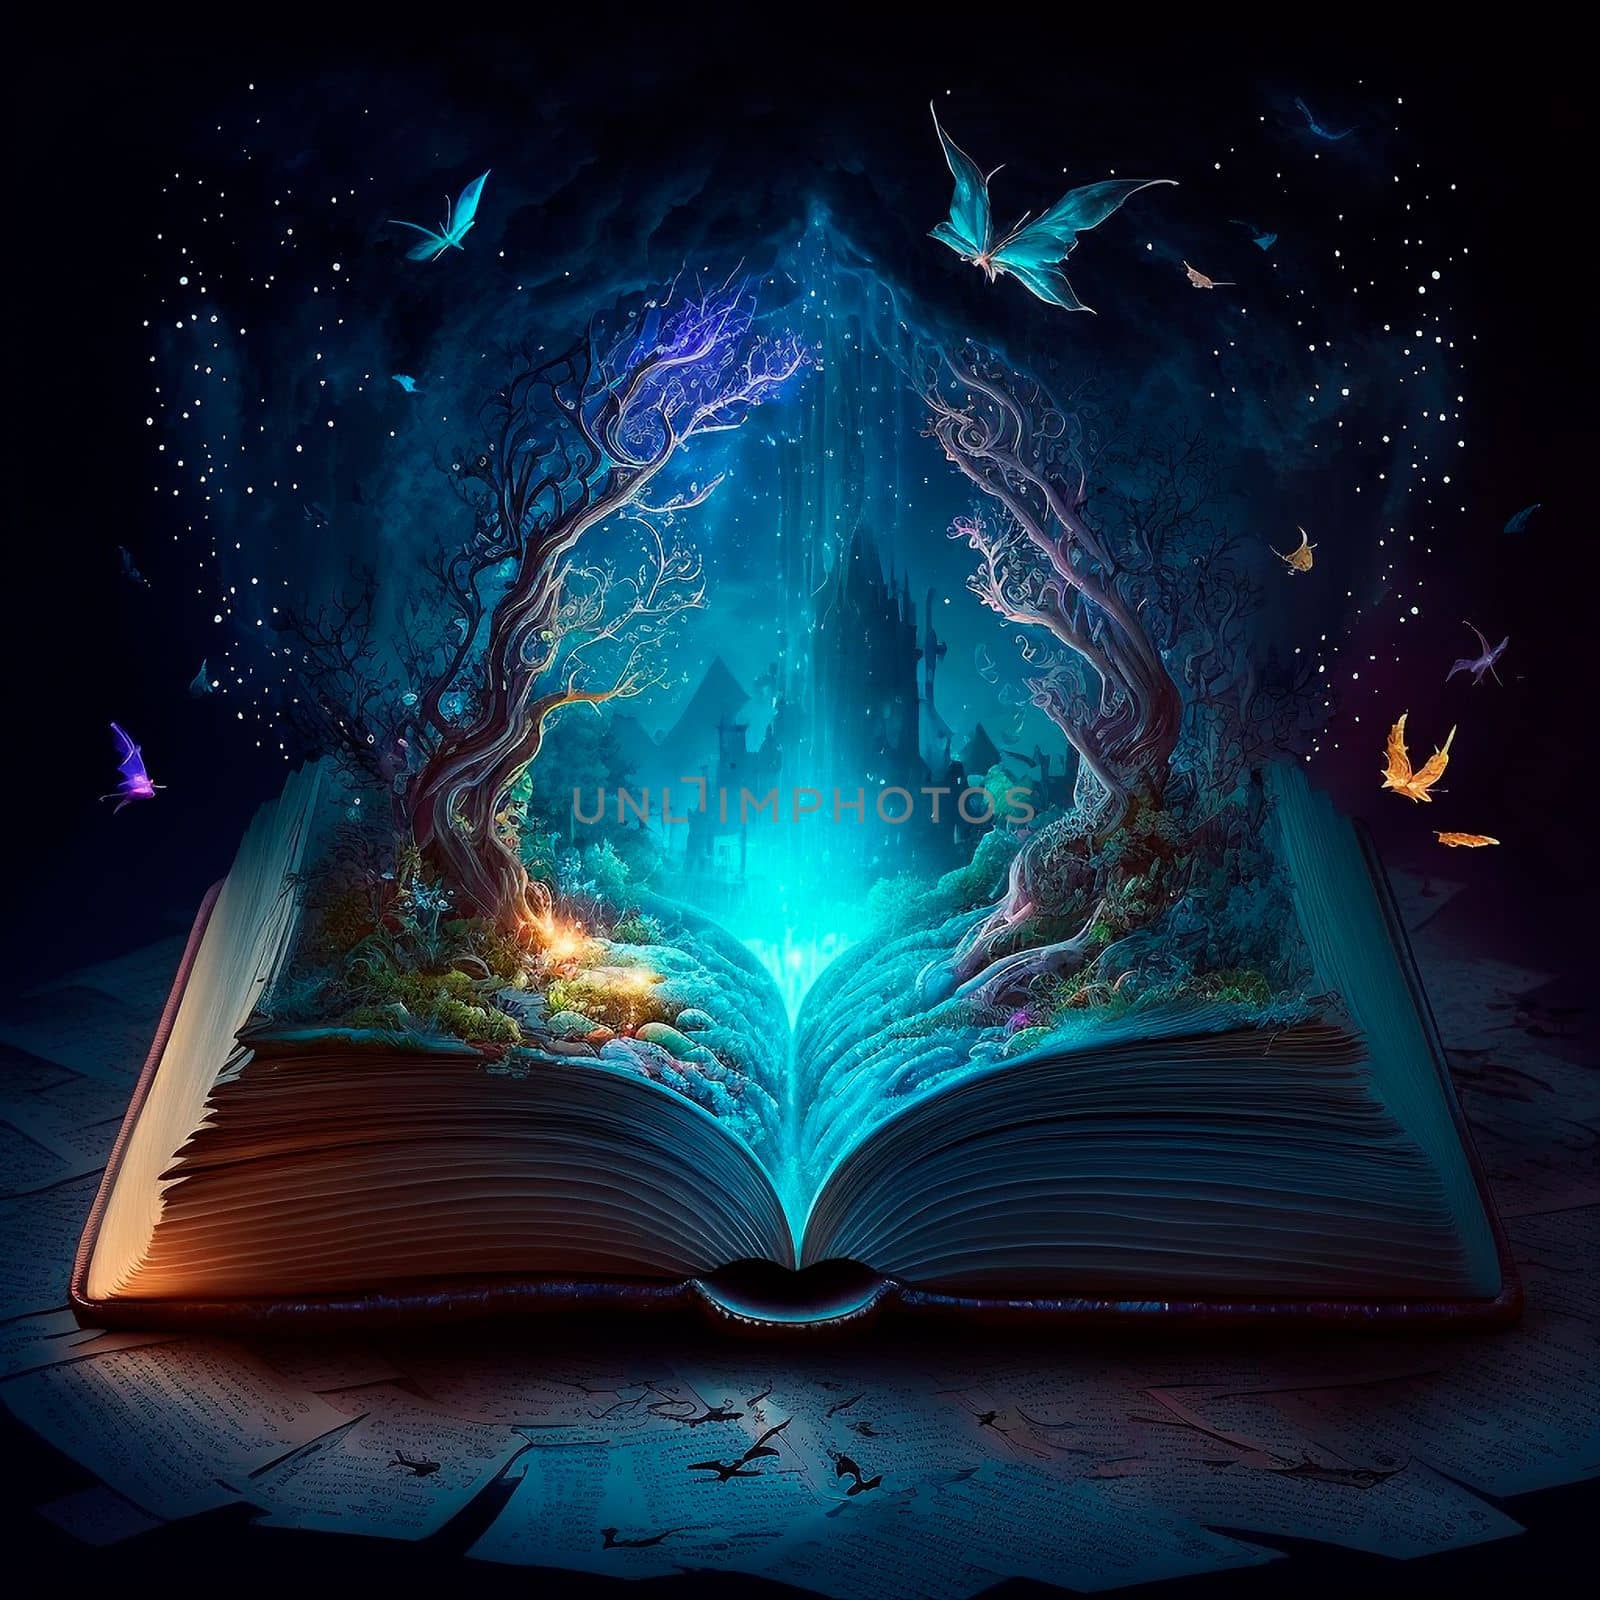 An open magic book with fairy tales by NeuroSky